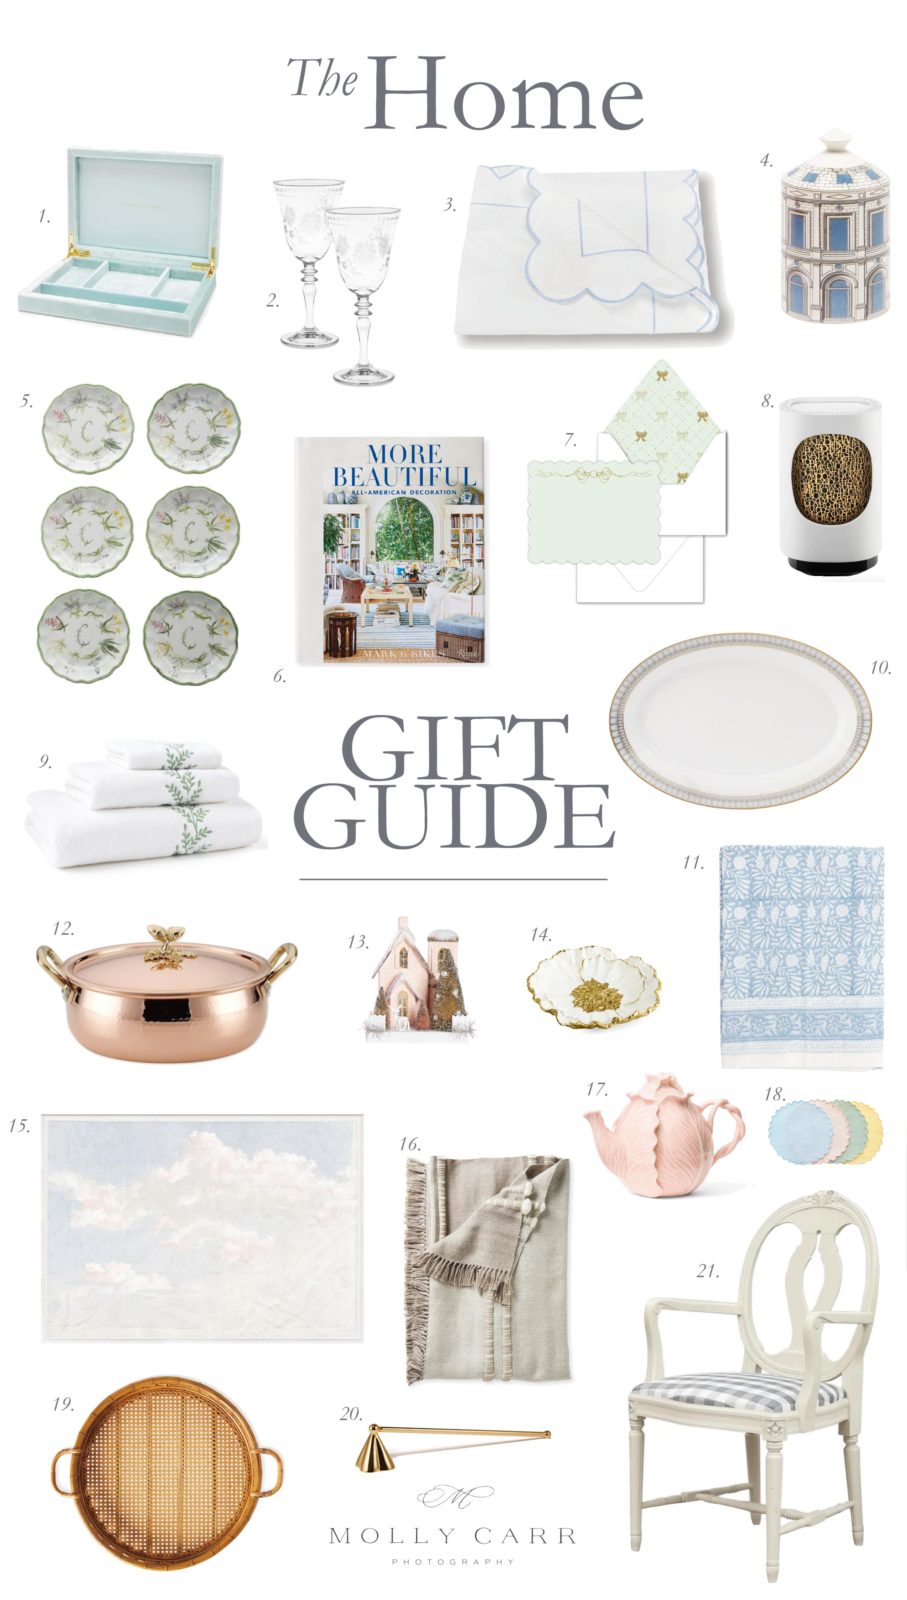 Elegant Home Gift Guide | Christmas Gift Guide 2020 | Holiday Present Ideas by Molly Carr Photography